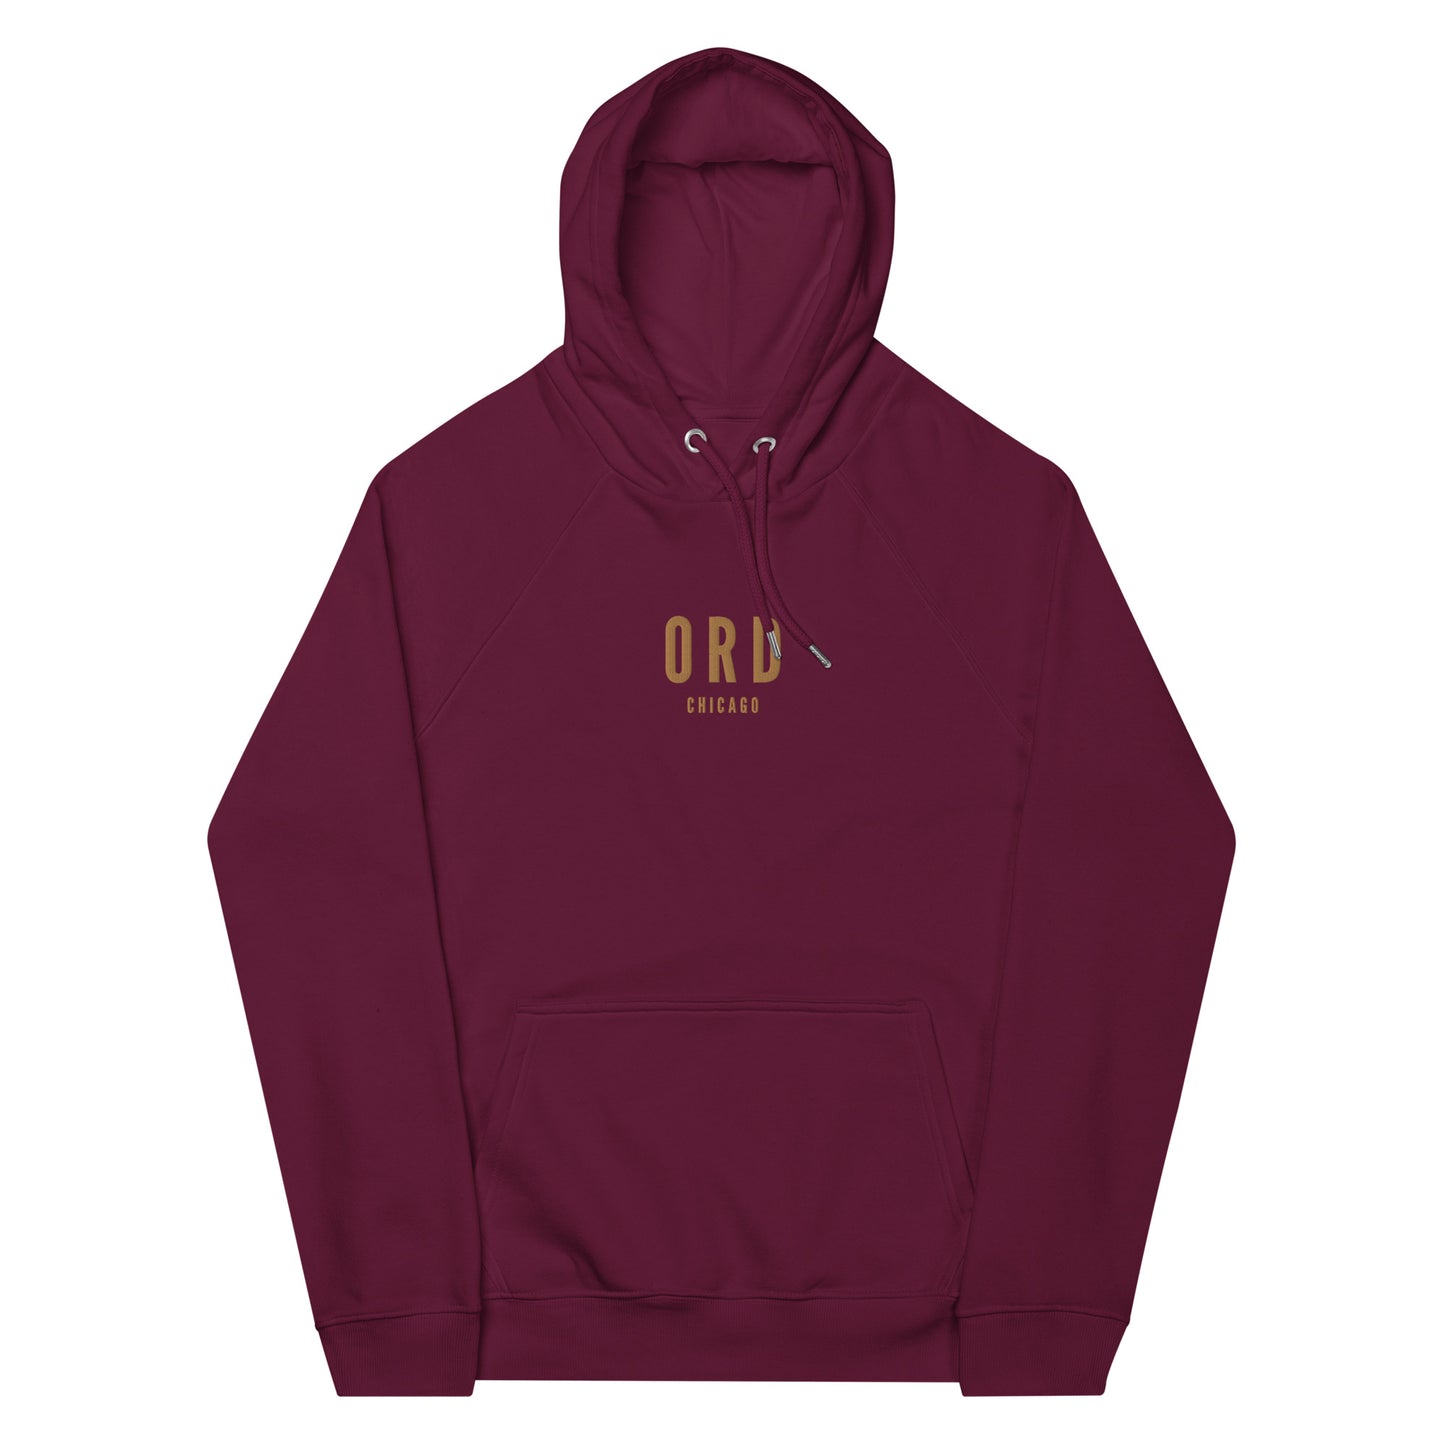 City Organic Hoodie - Old Gold • ORD Chicago • YHM Designs - Image 11